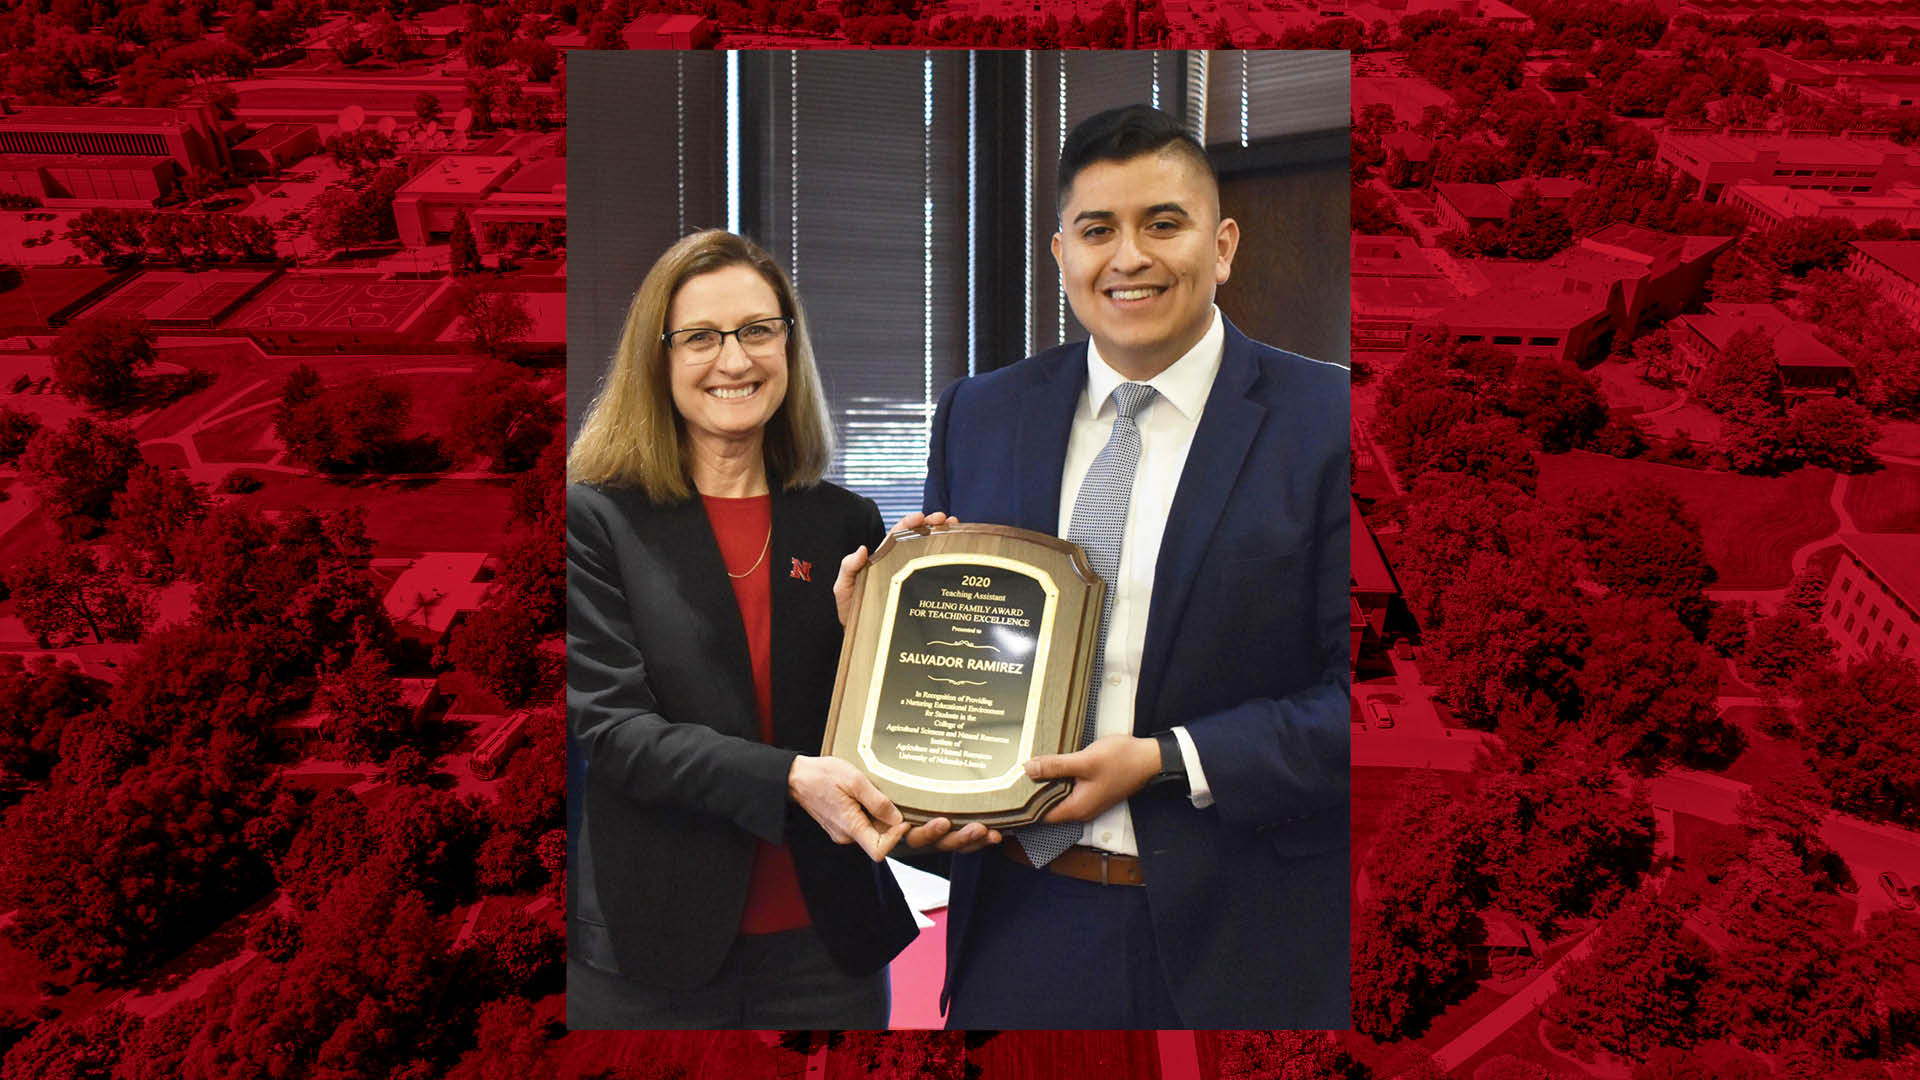 Betty Walter-Shea, CASNR interim associate dean (left), presents Salvador Ramirez with the Holling Family Teaching Assistant Teaching Excellence award March 11 at the Nebraska East Union.